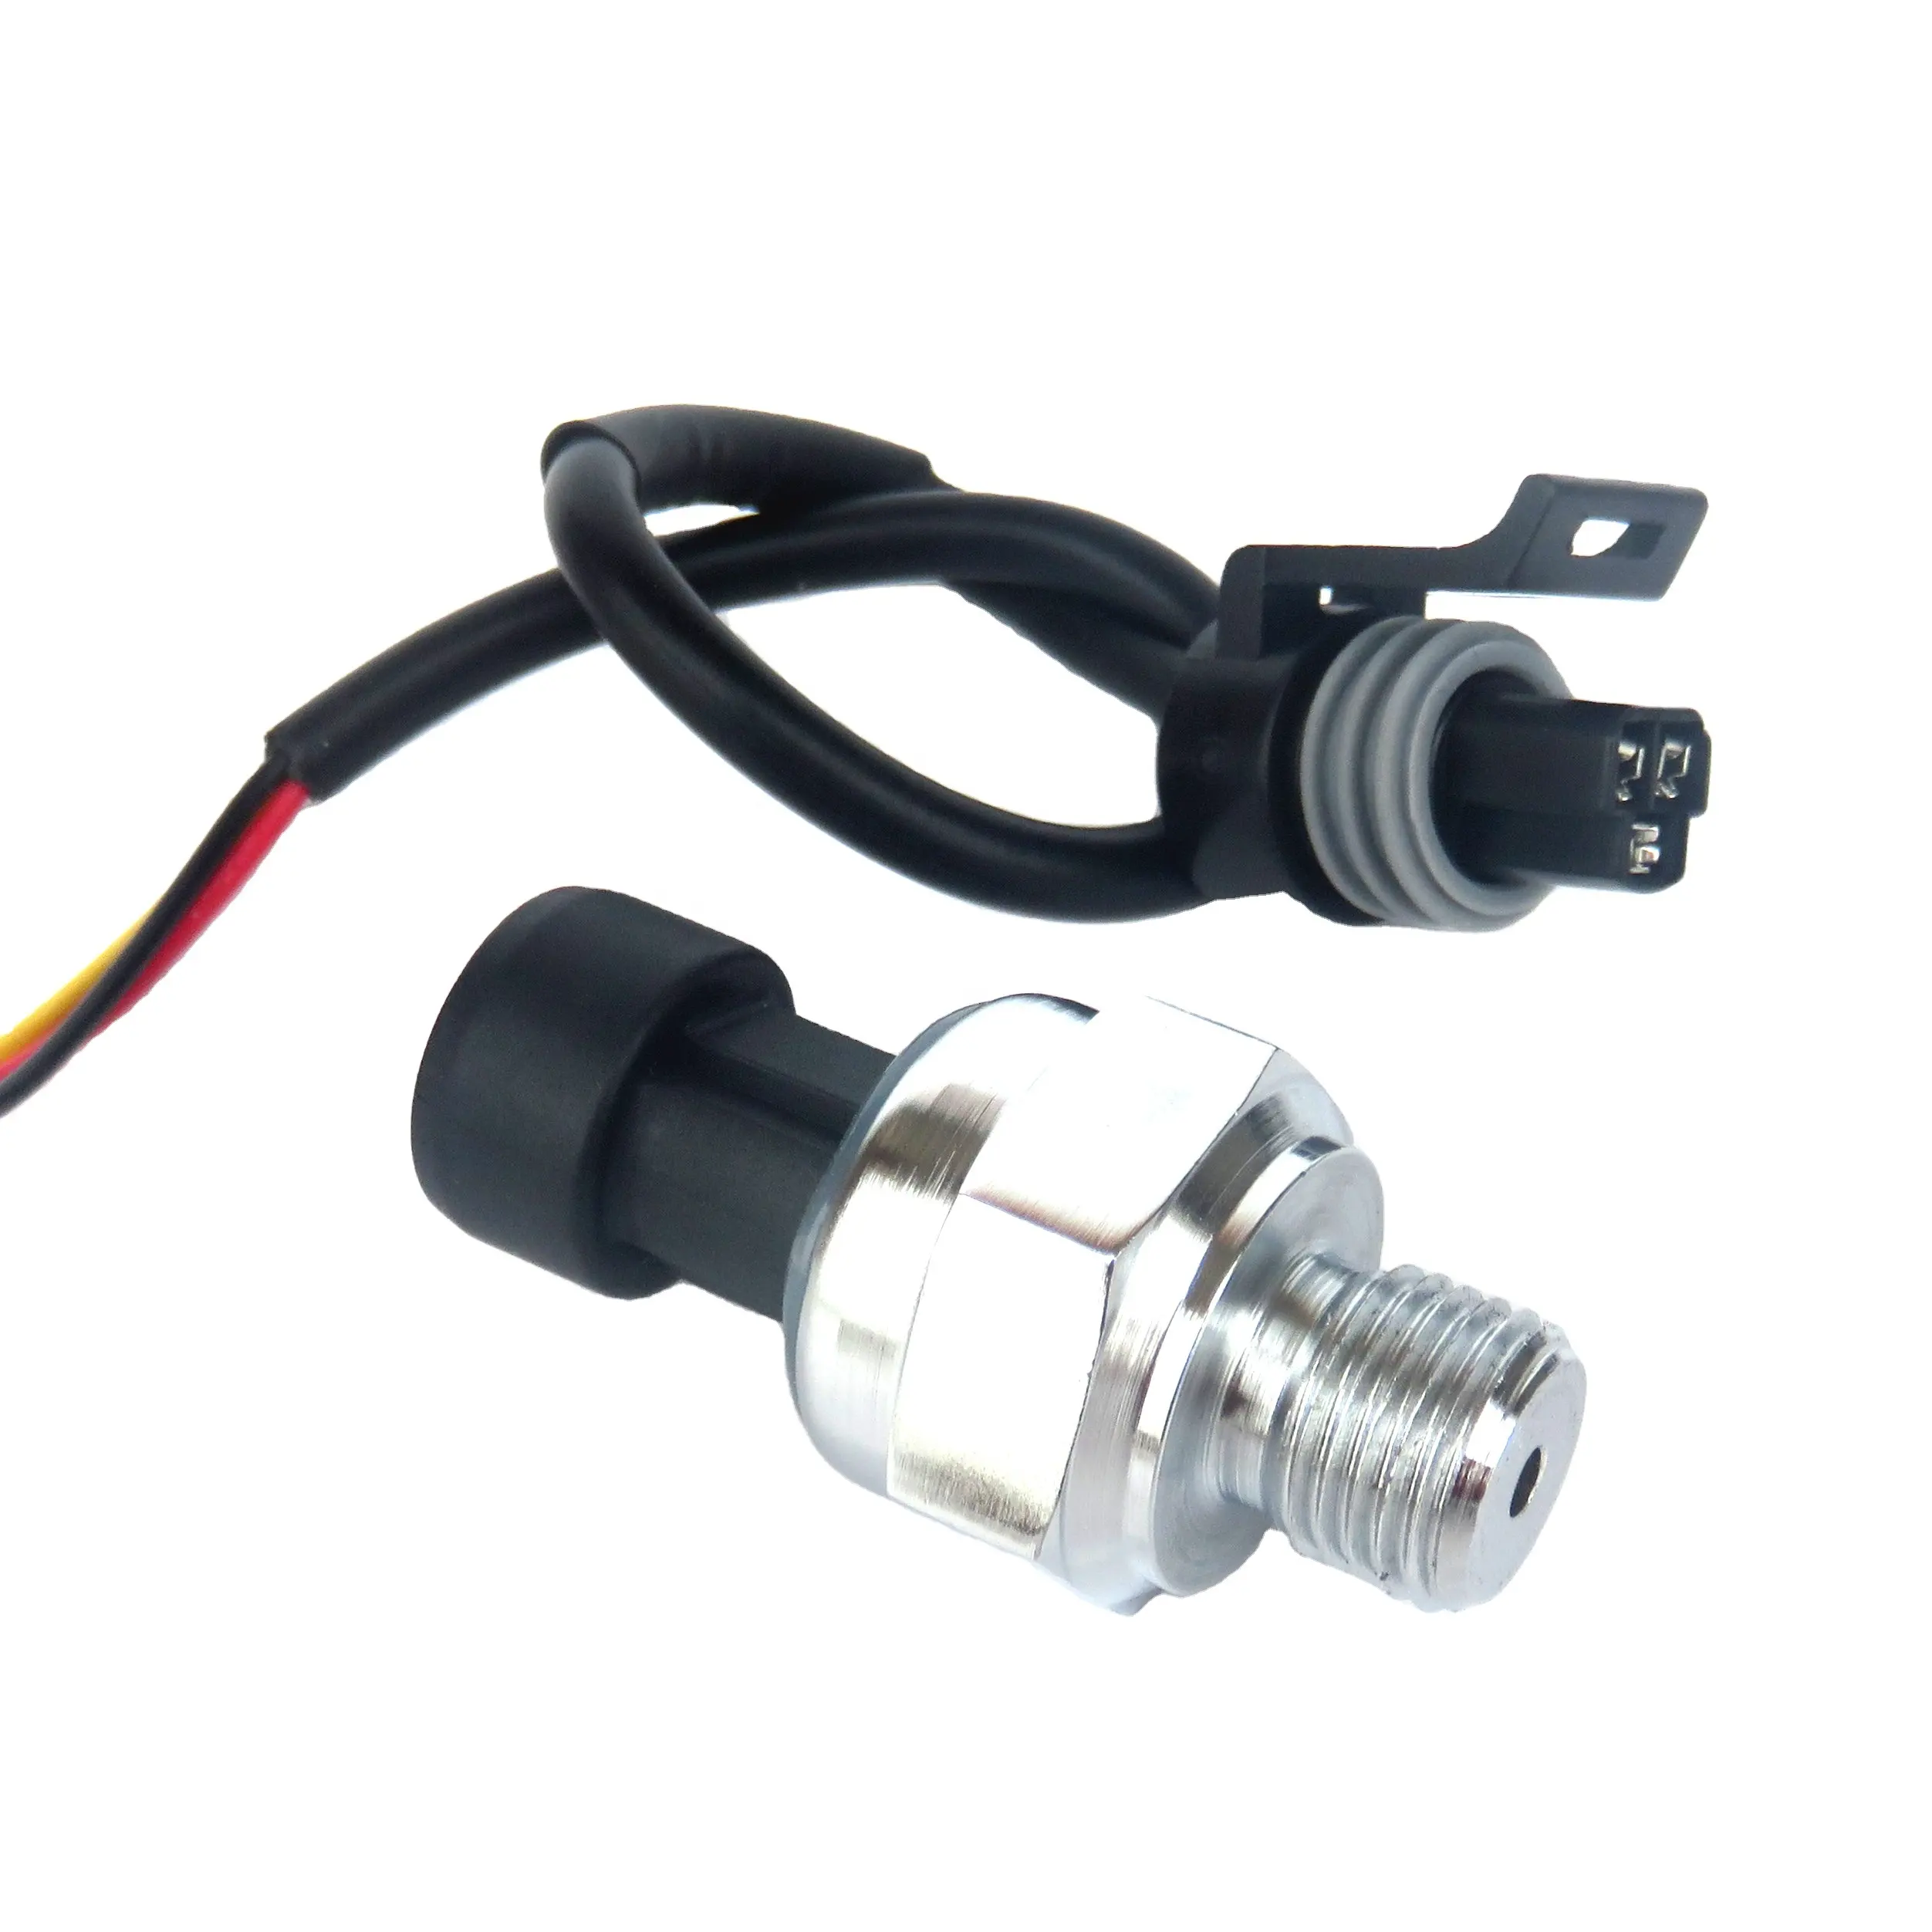 SEA Best Selling DC 5V G1/4 Pressure Sensor Transmitter Pressure Transducer 3MPa 174 PSI For Air Water Gas Oil